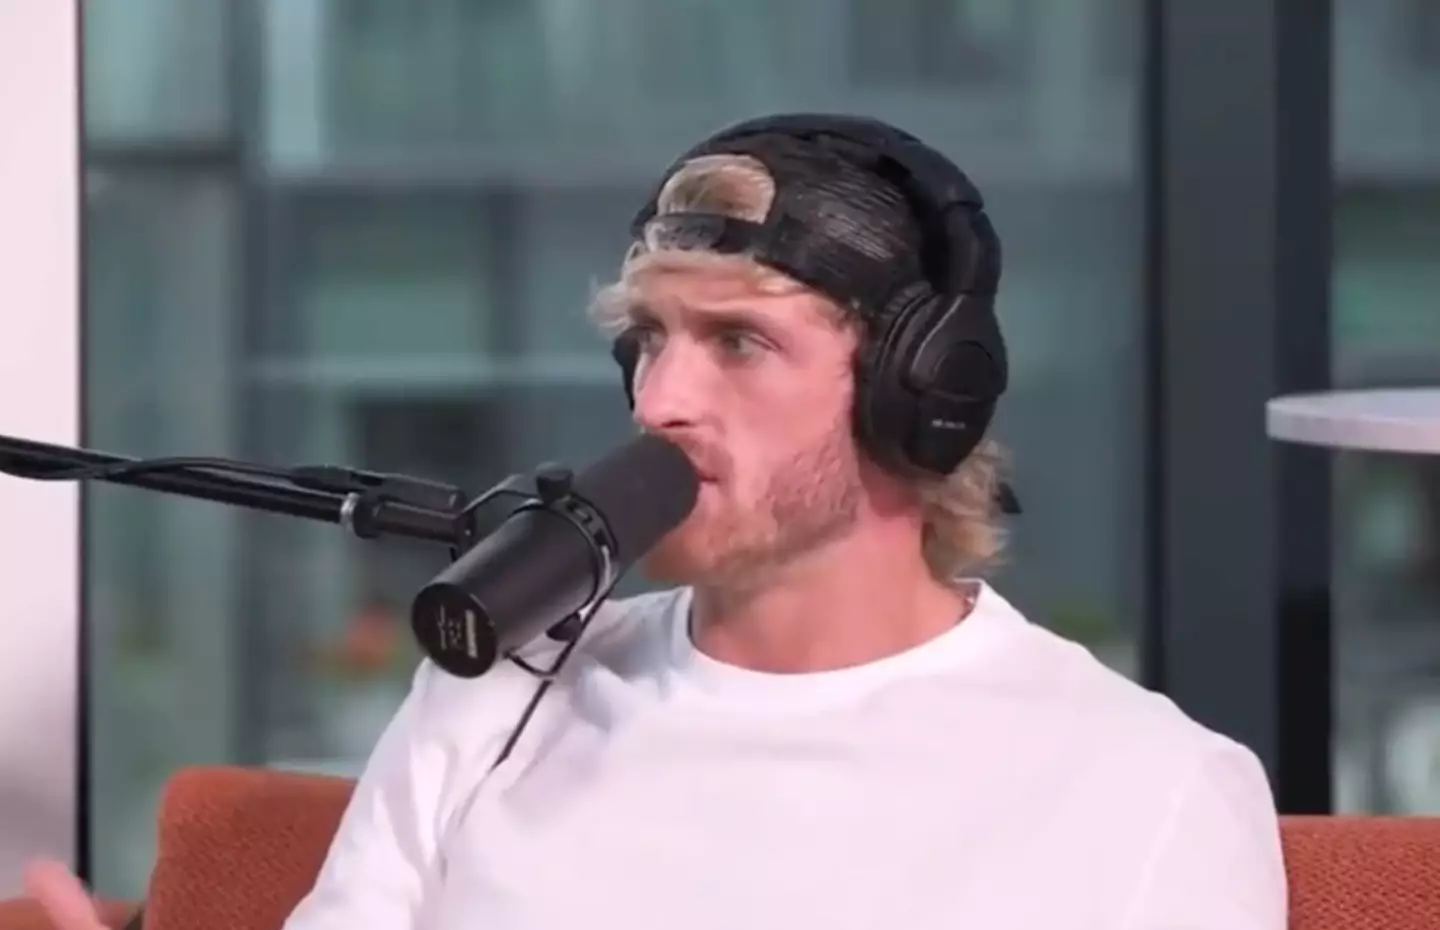 Logan Paul sat down with KSI to air their issues with Dillon Danis.